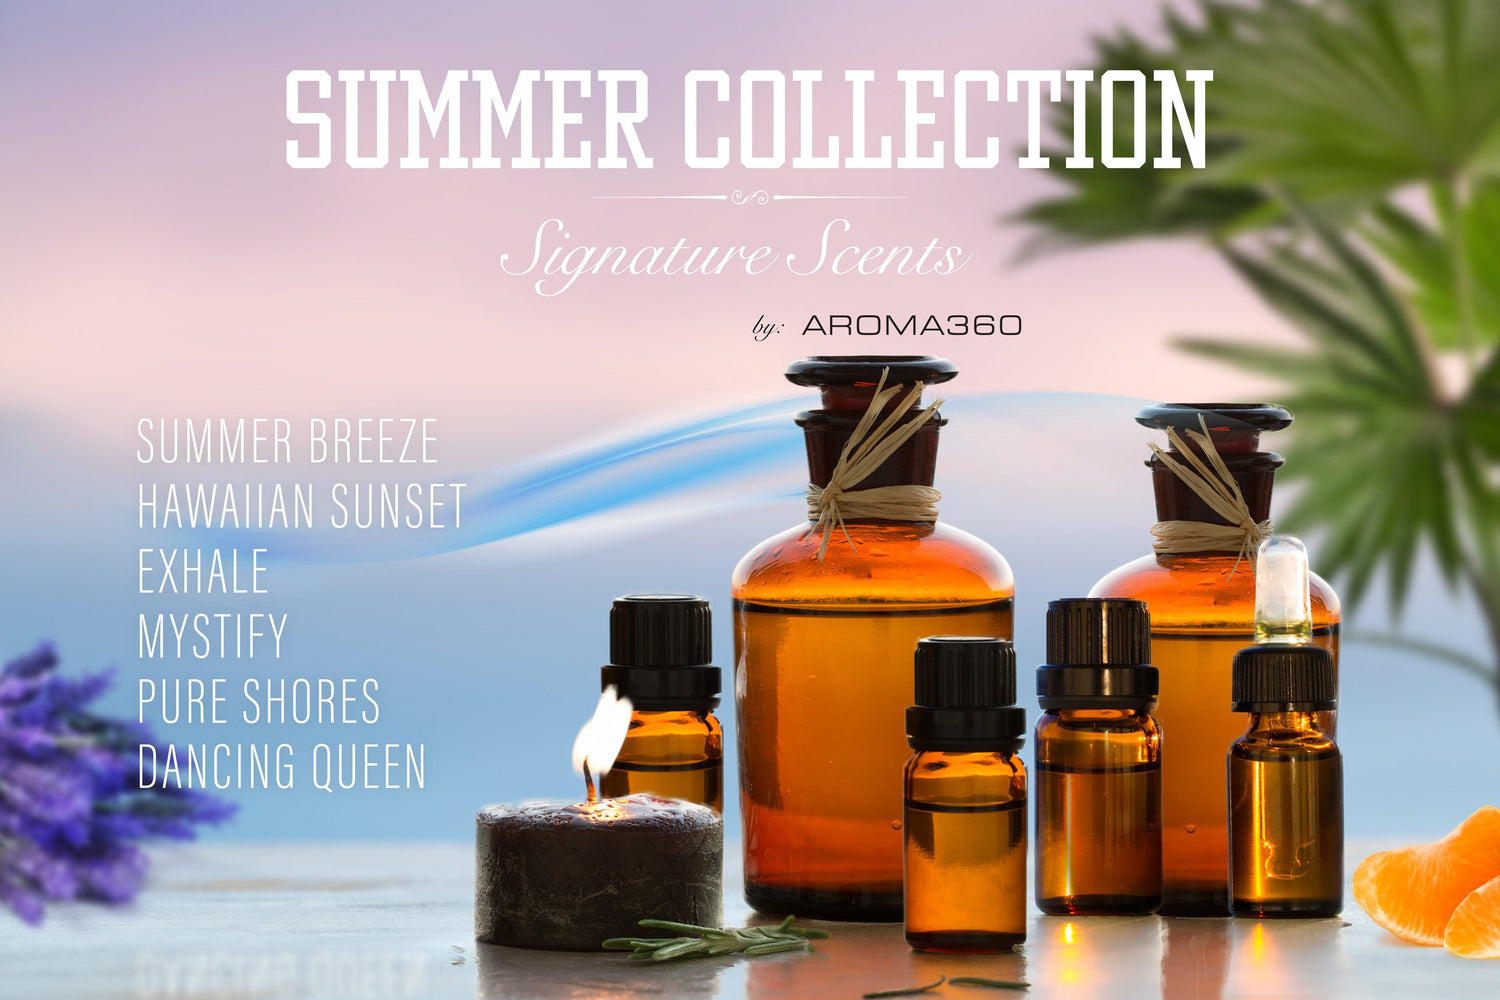 Introducing the Summer Collection!